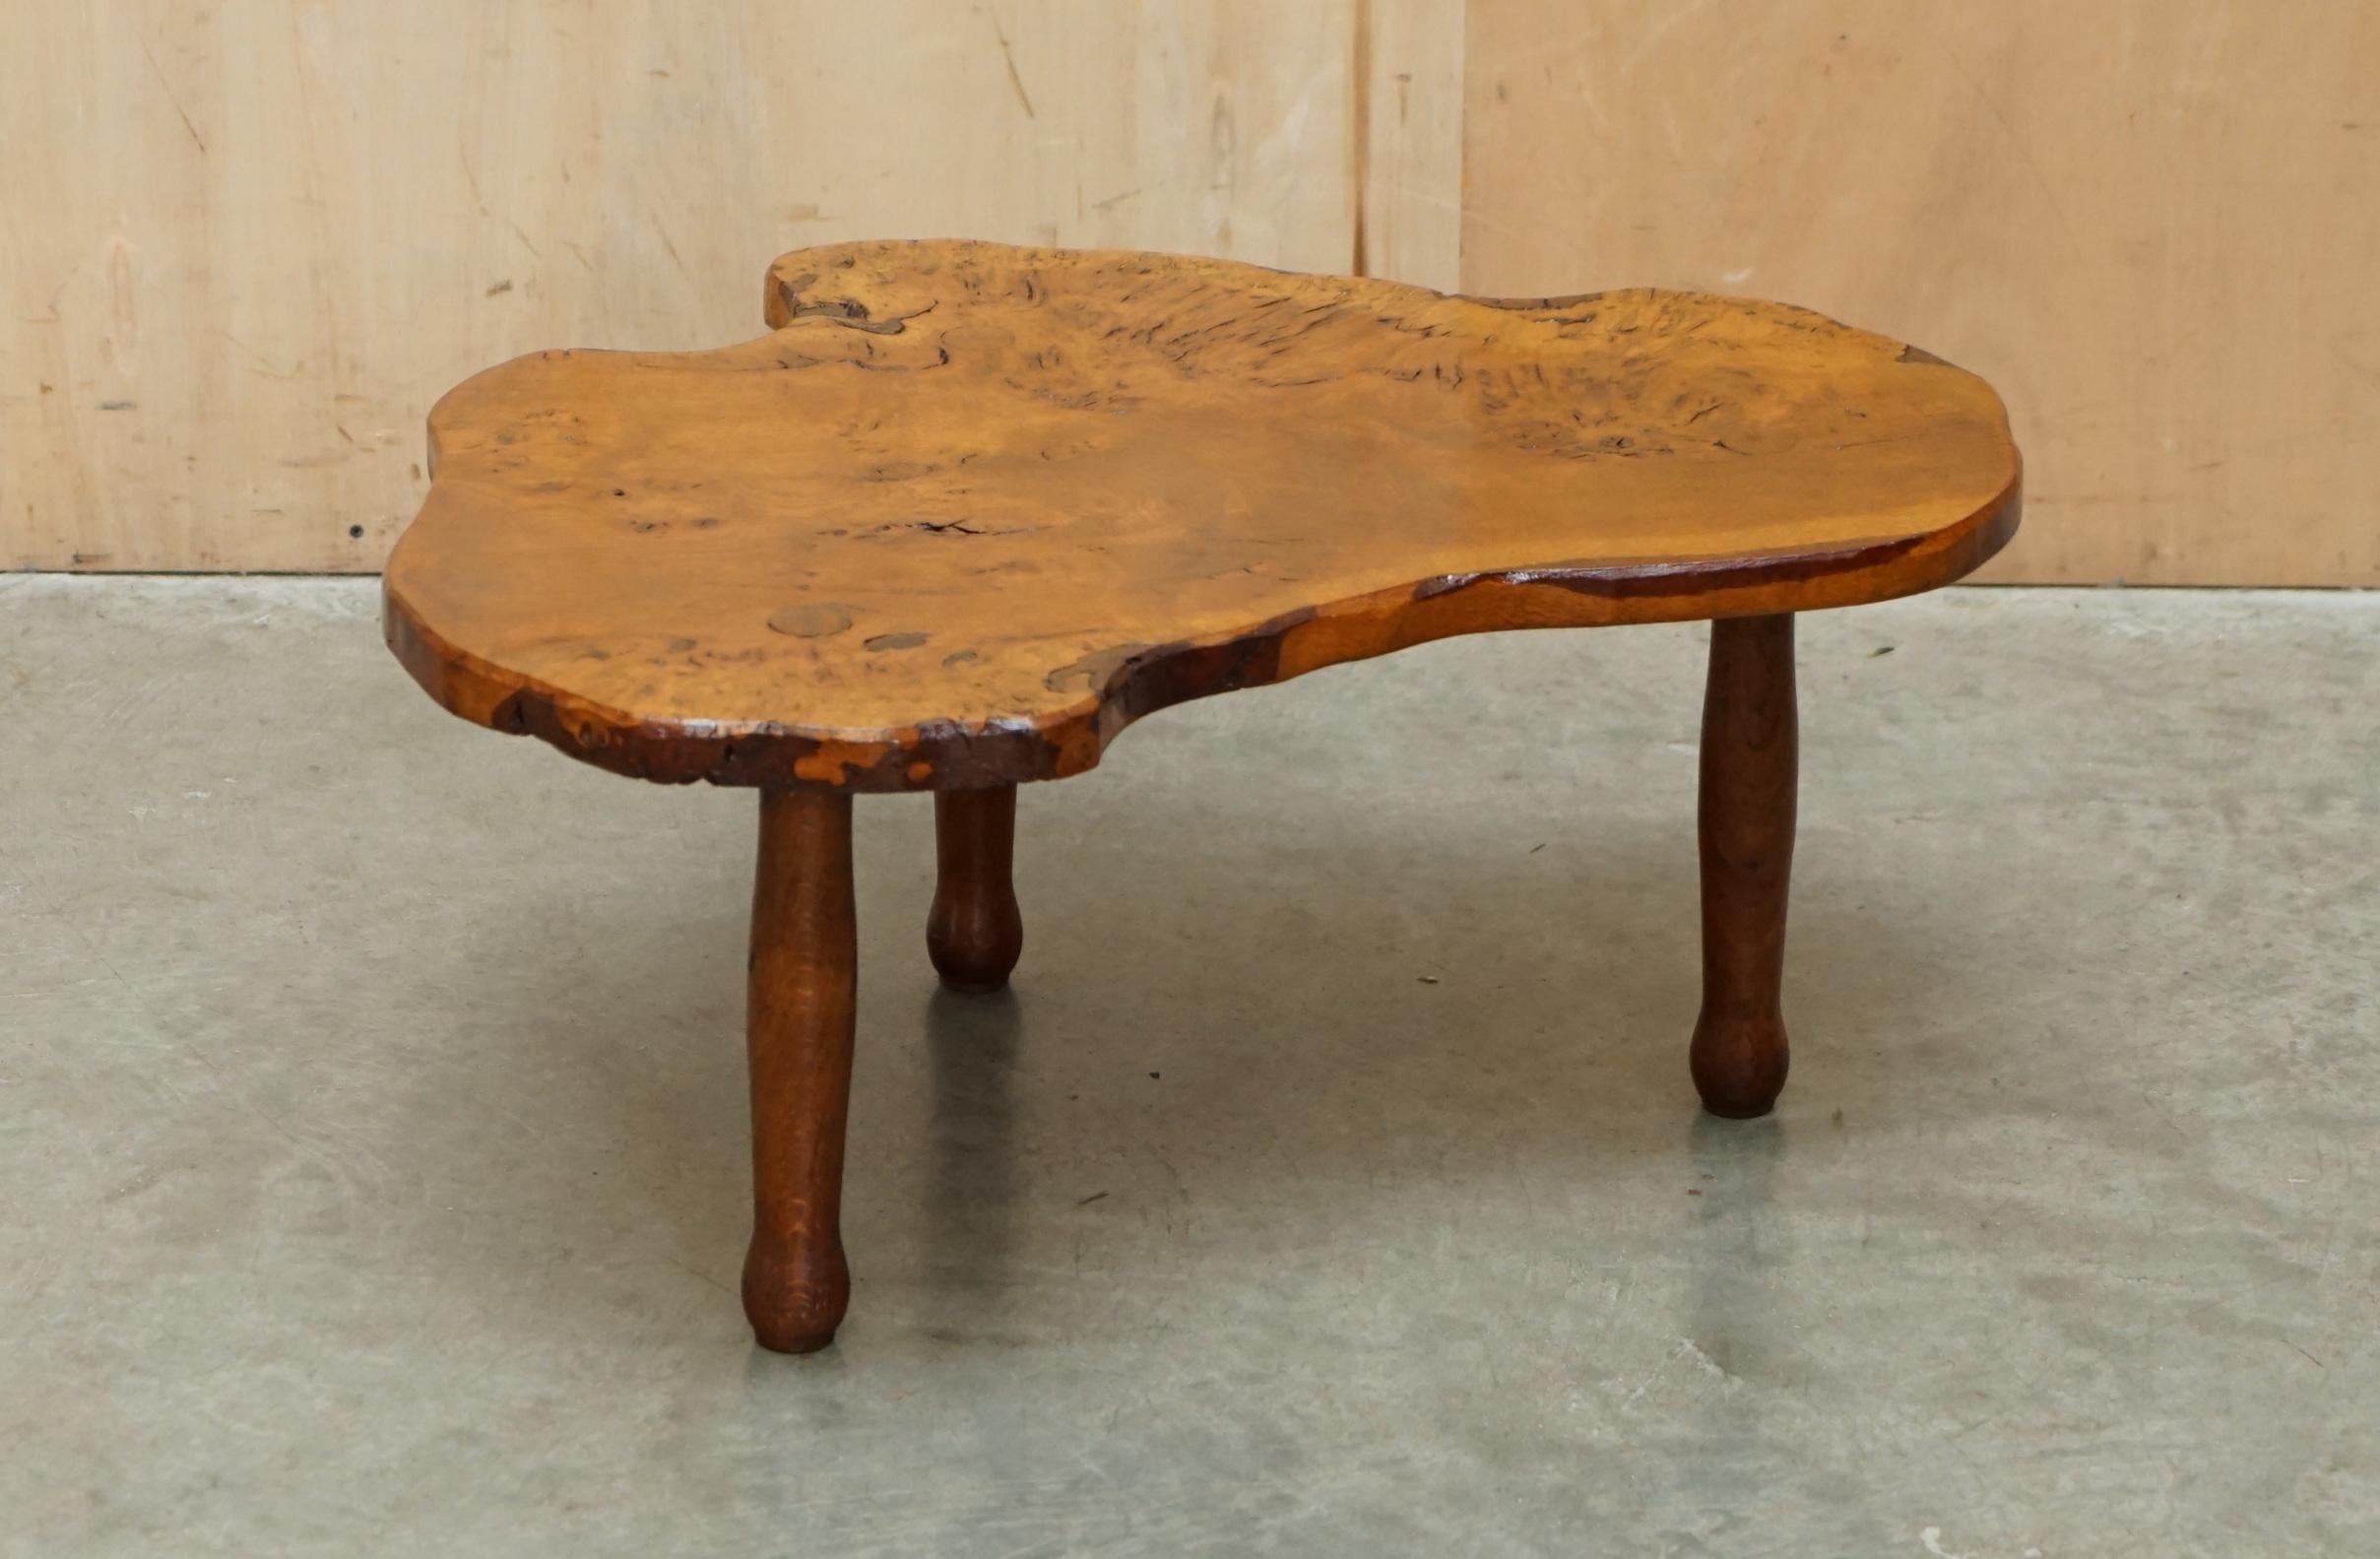 Royal House Antiques

Royal House Antiques is delighted to offer for sale this super decorative live edge slab coffee table in burr pippy oak 

Please note the delivery fee listed is just a guide, it covers within the M25 only for the UK and local